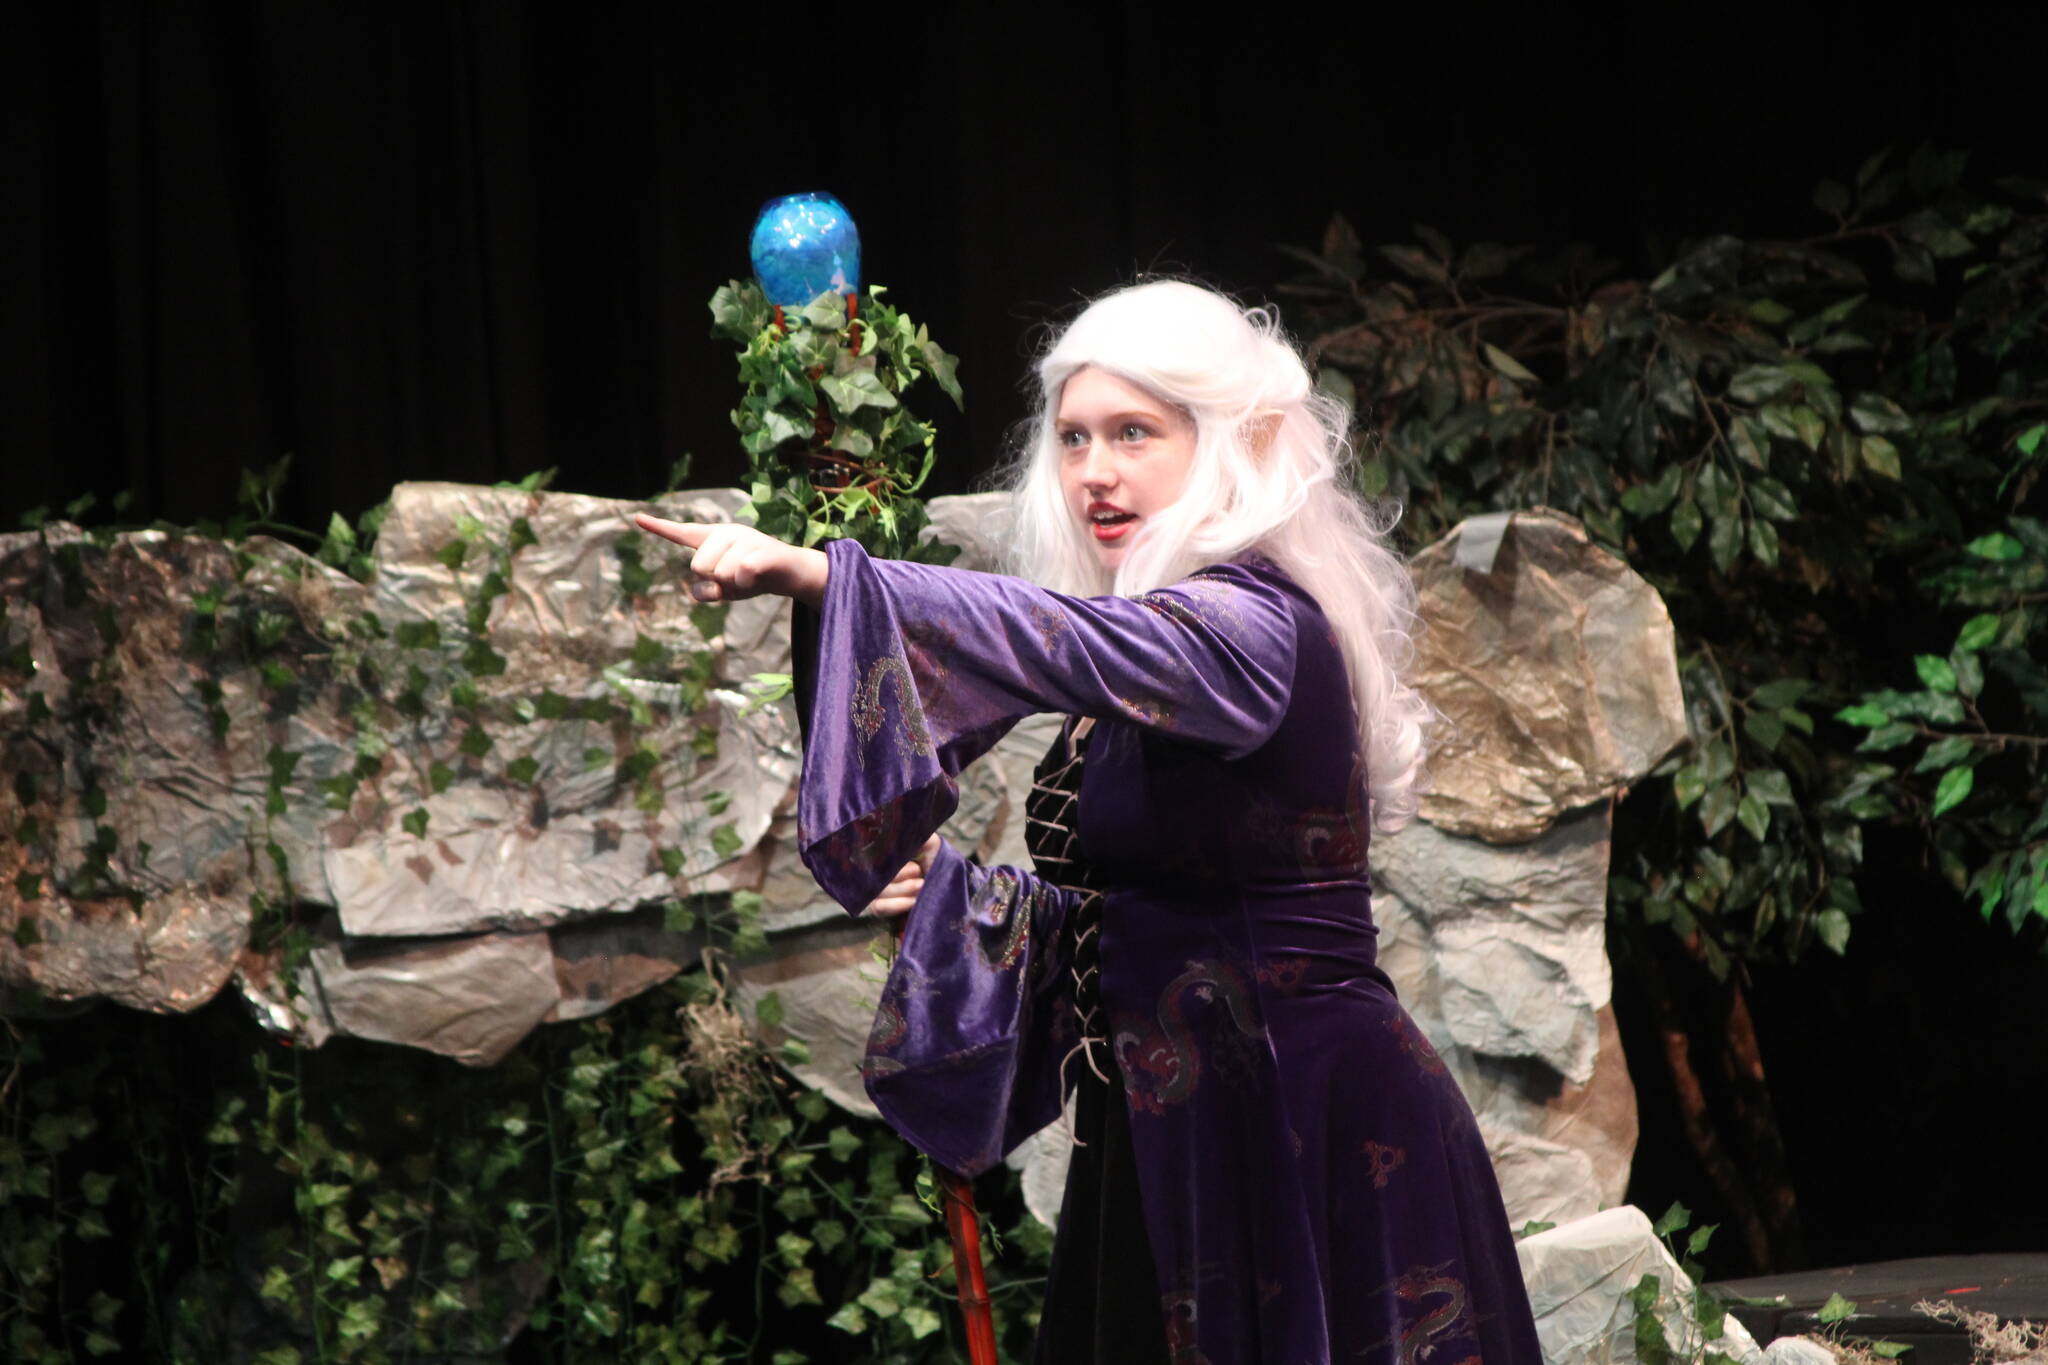 Photos by Karina Andrew/Whidbey News-Times
Freshman Sydney Wallace plays Dungeons and Dragons character Kaliope.